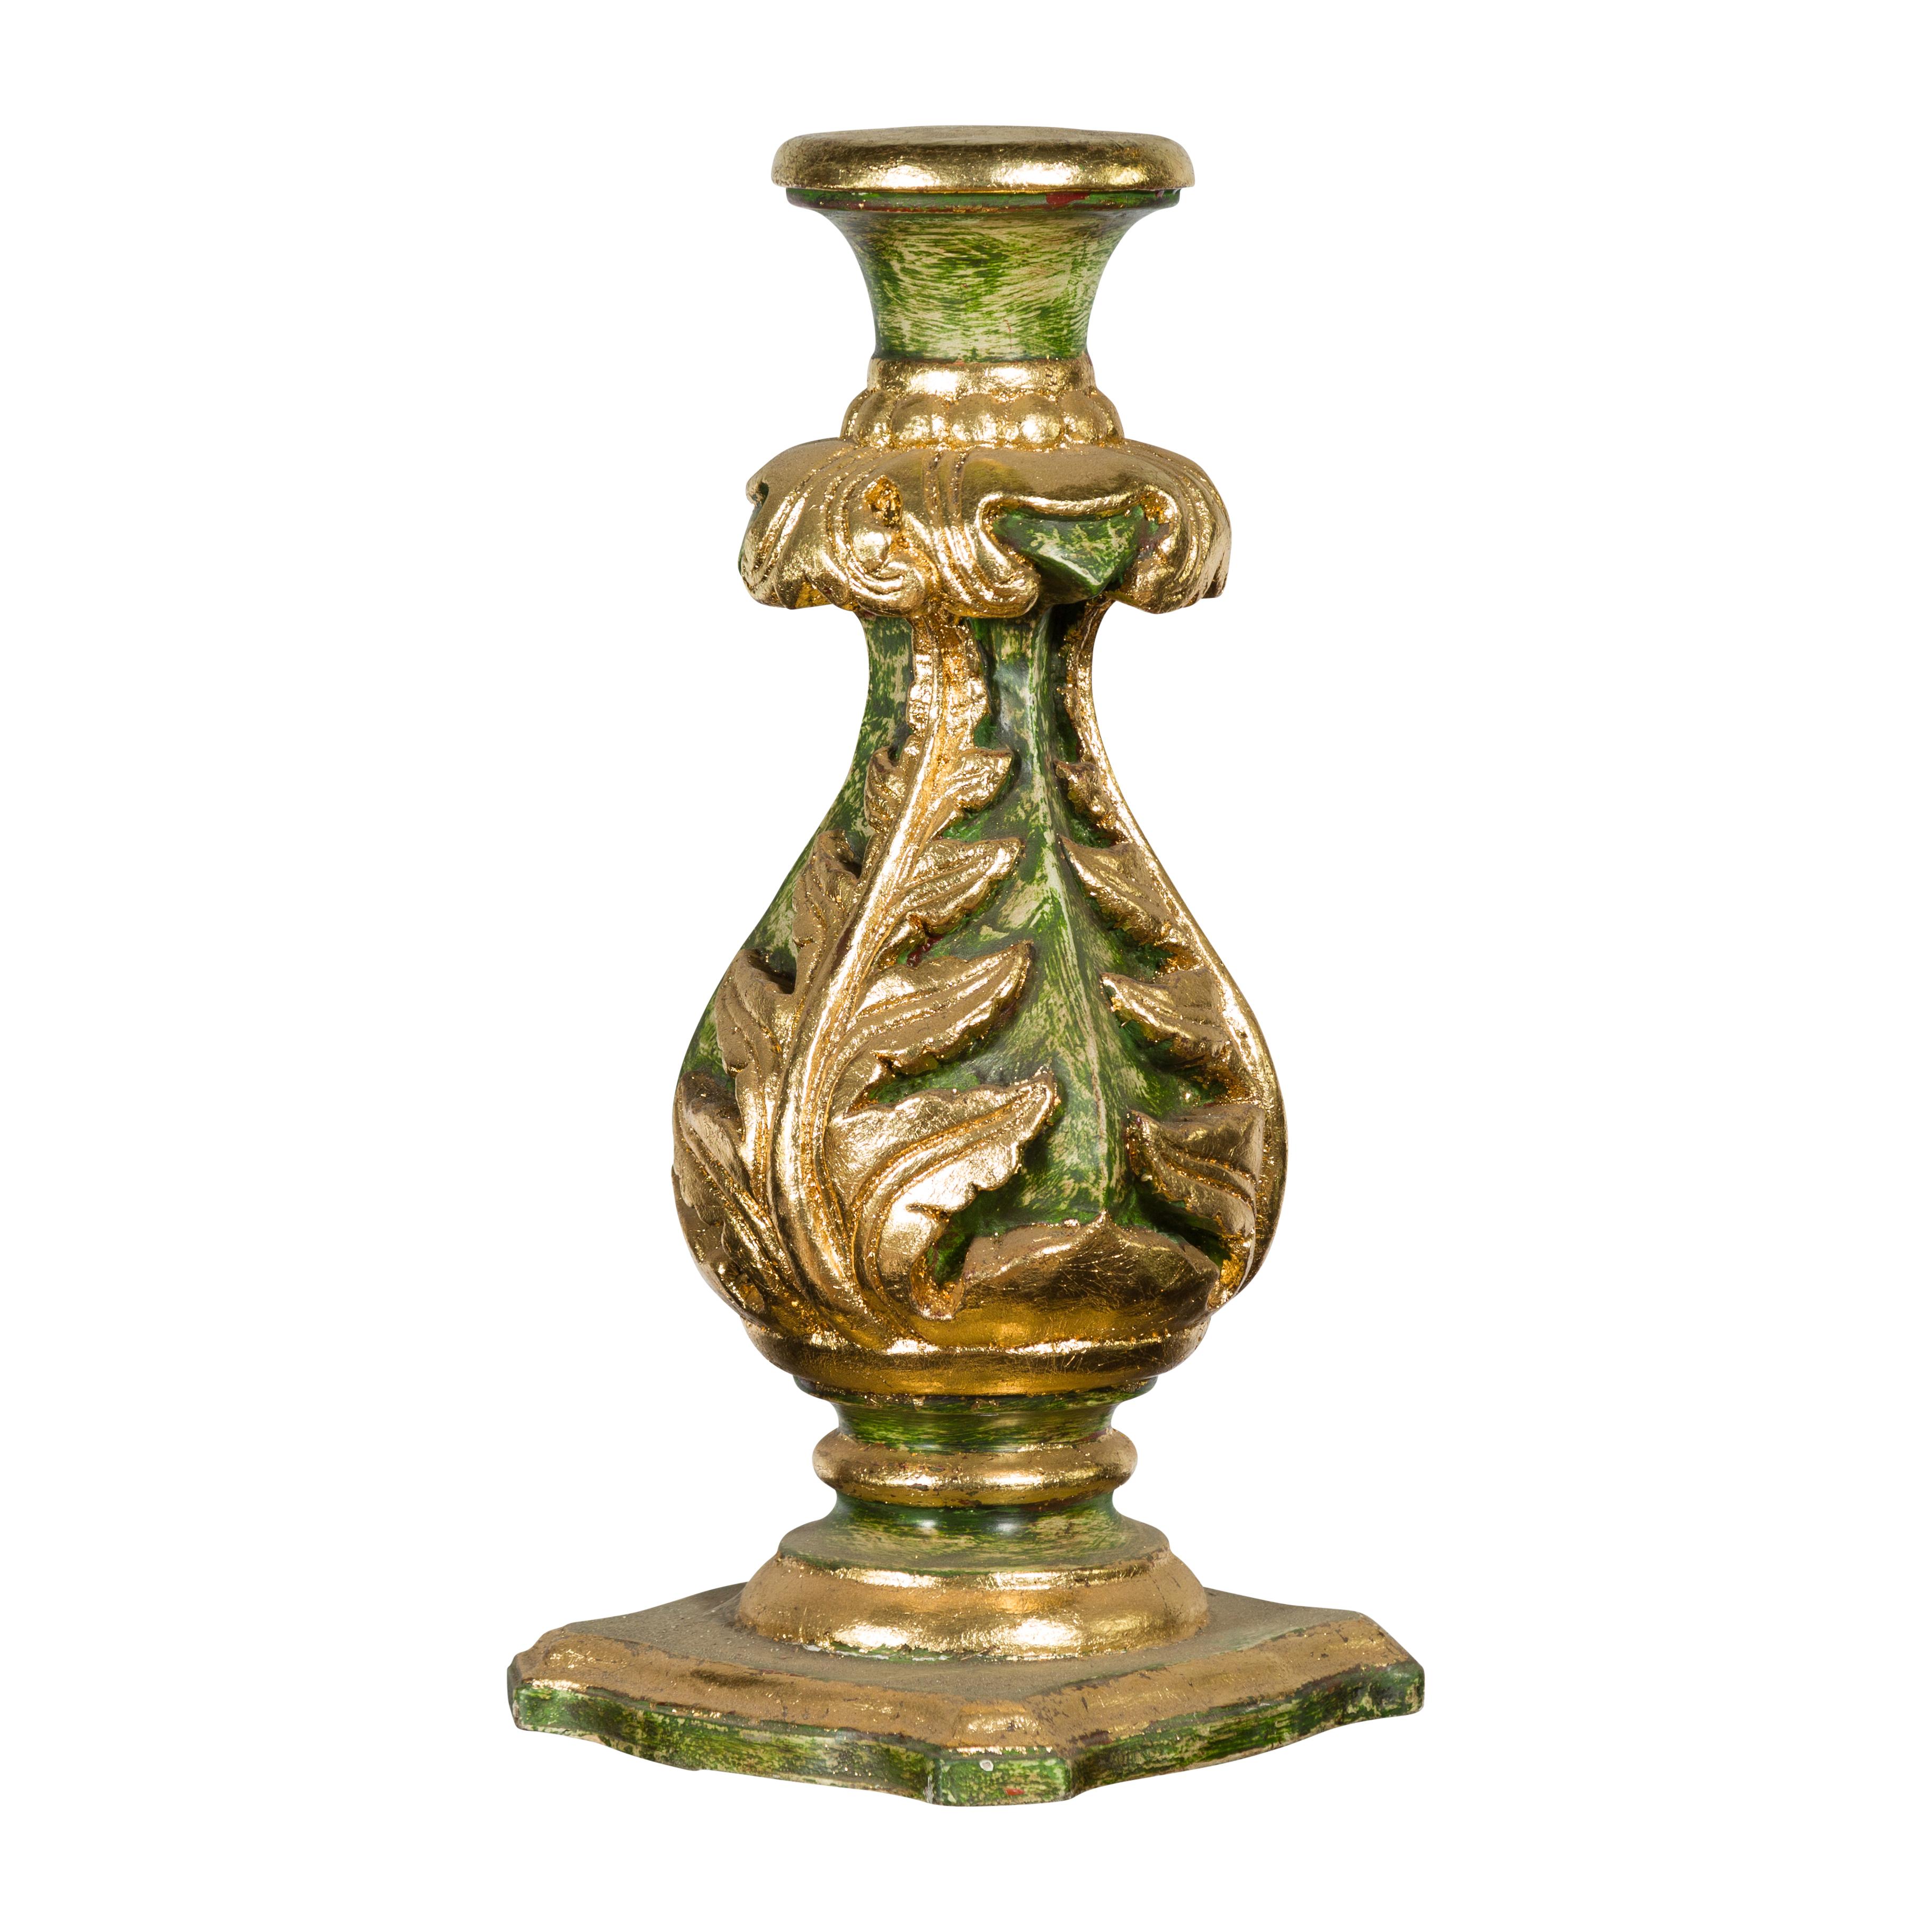 Indian Green and Gold Acanthus Carved Finial Drilled to Be Made into a Lamp For Sale 11